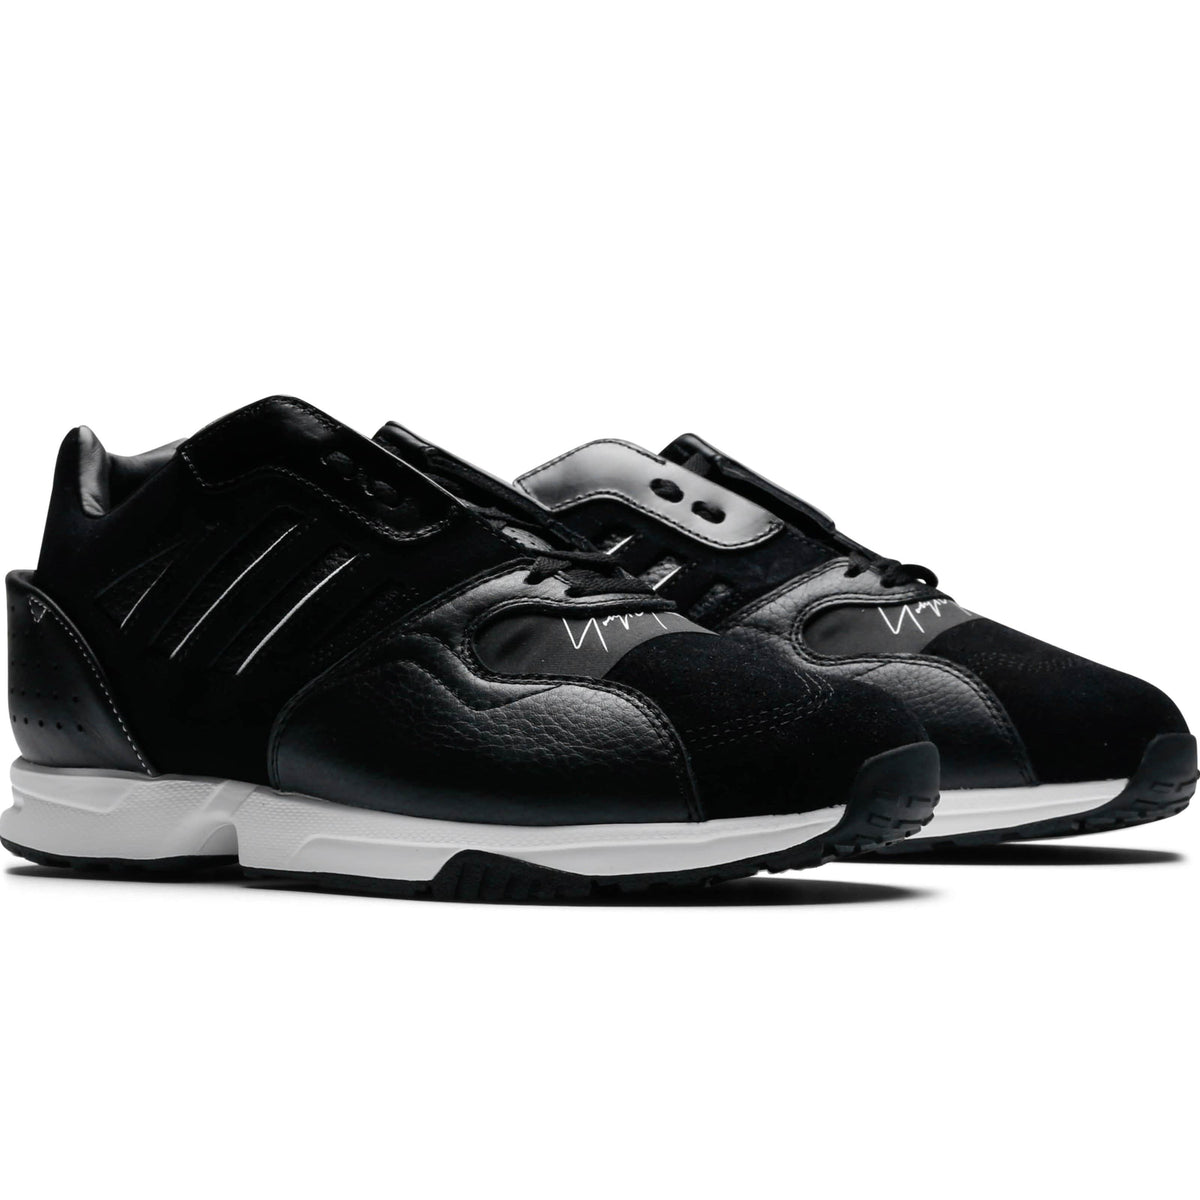 y3 zx run trainers